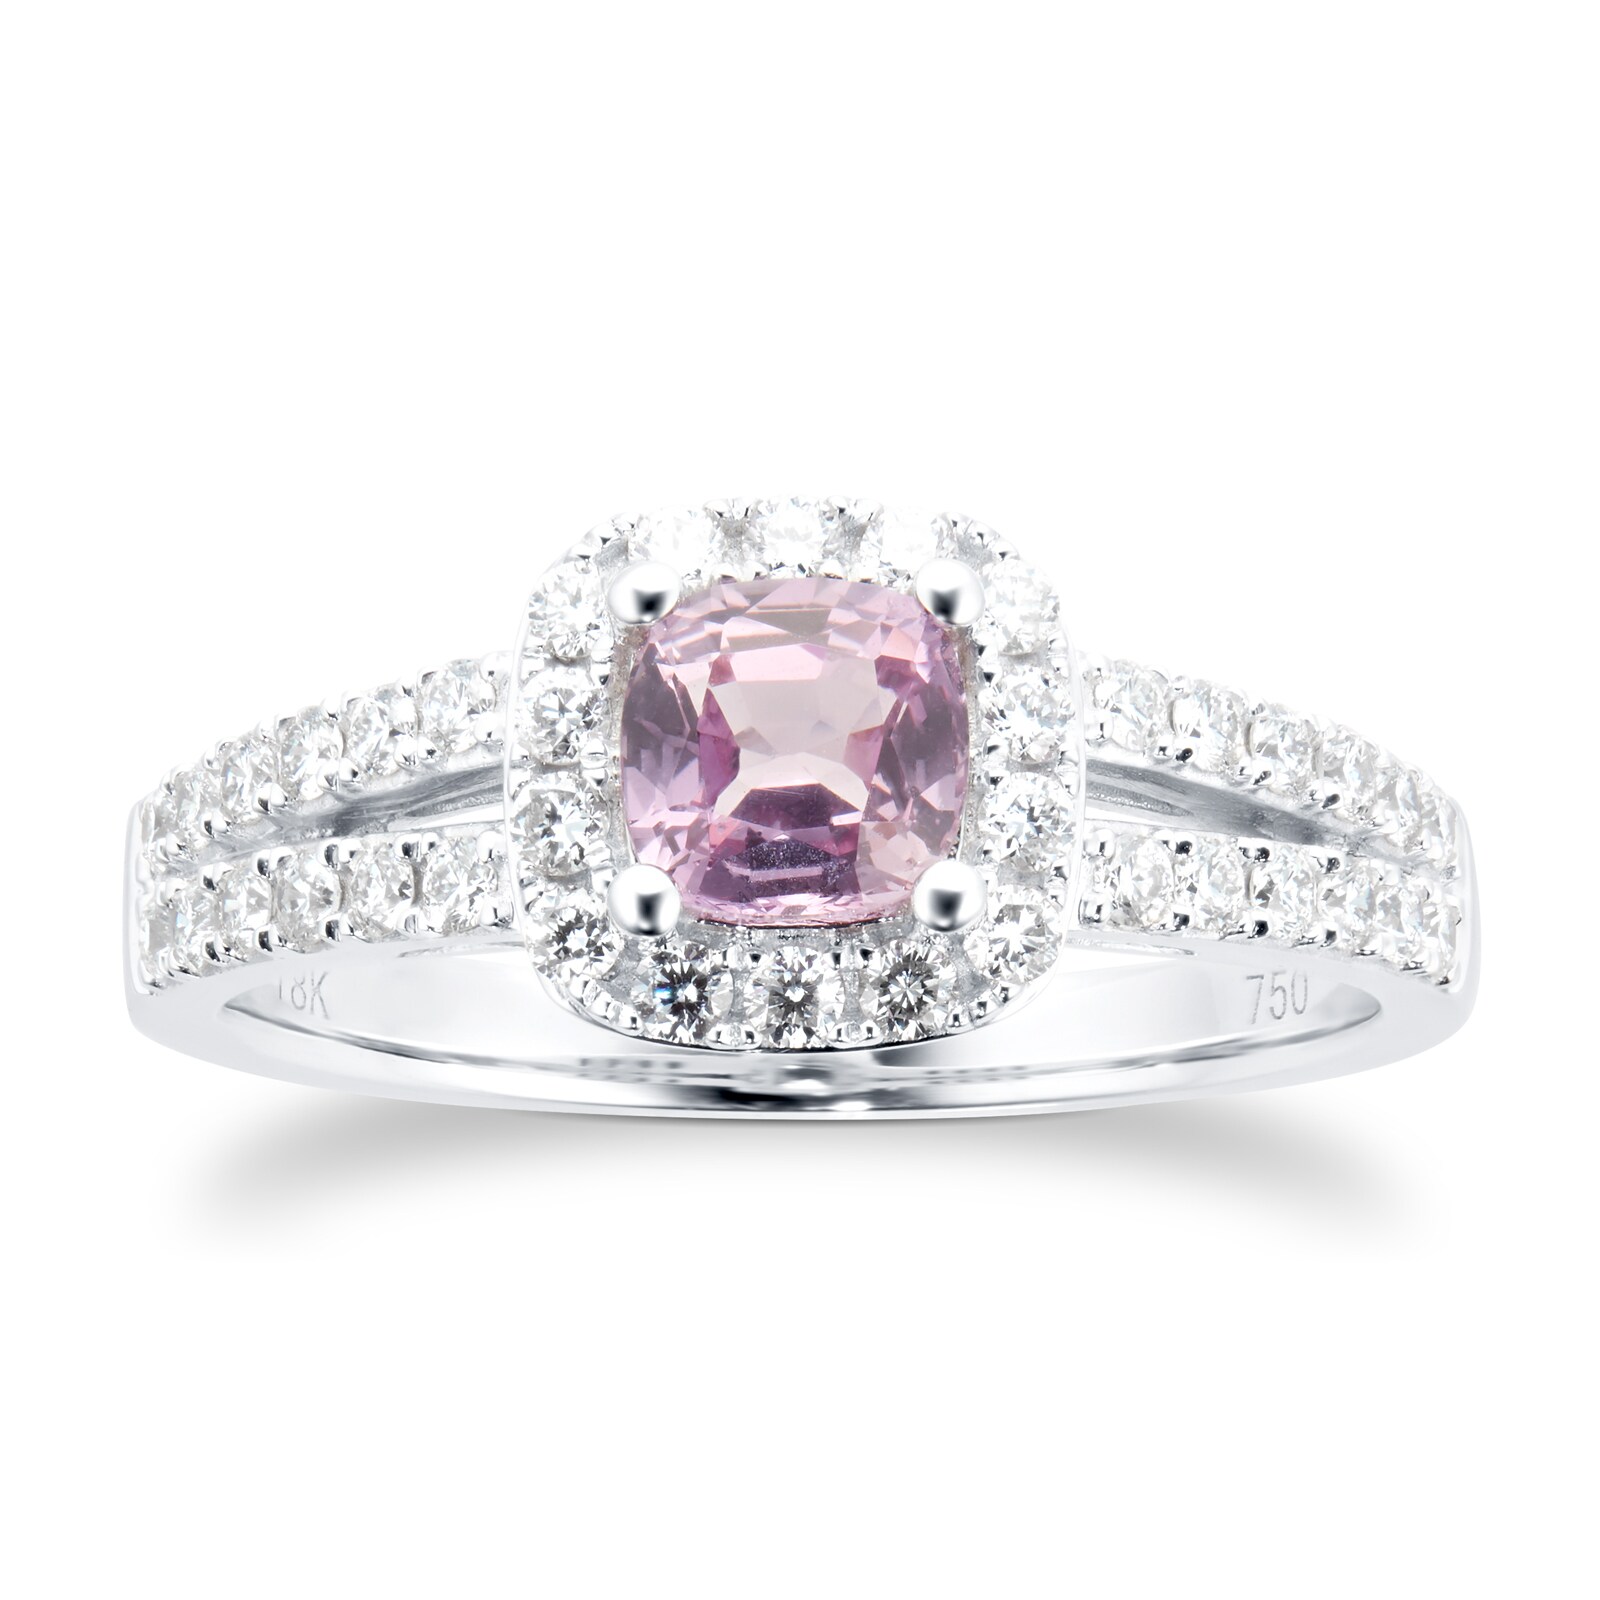 18ct White Gold Pink Sapphire & 0.46cttw Diamond Cushion Cut Halo Ring - Ring Size L